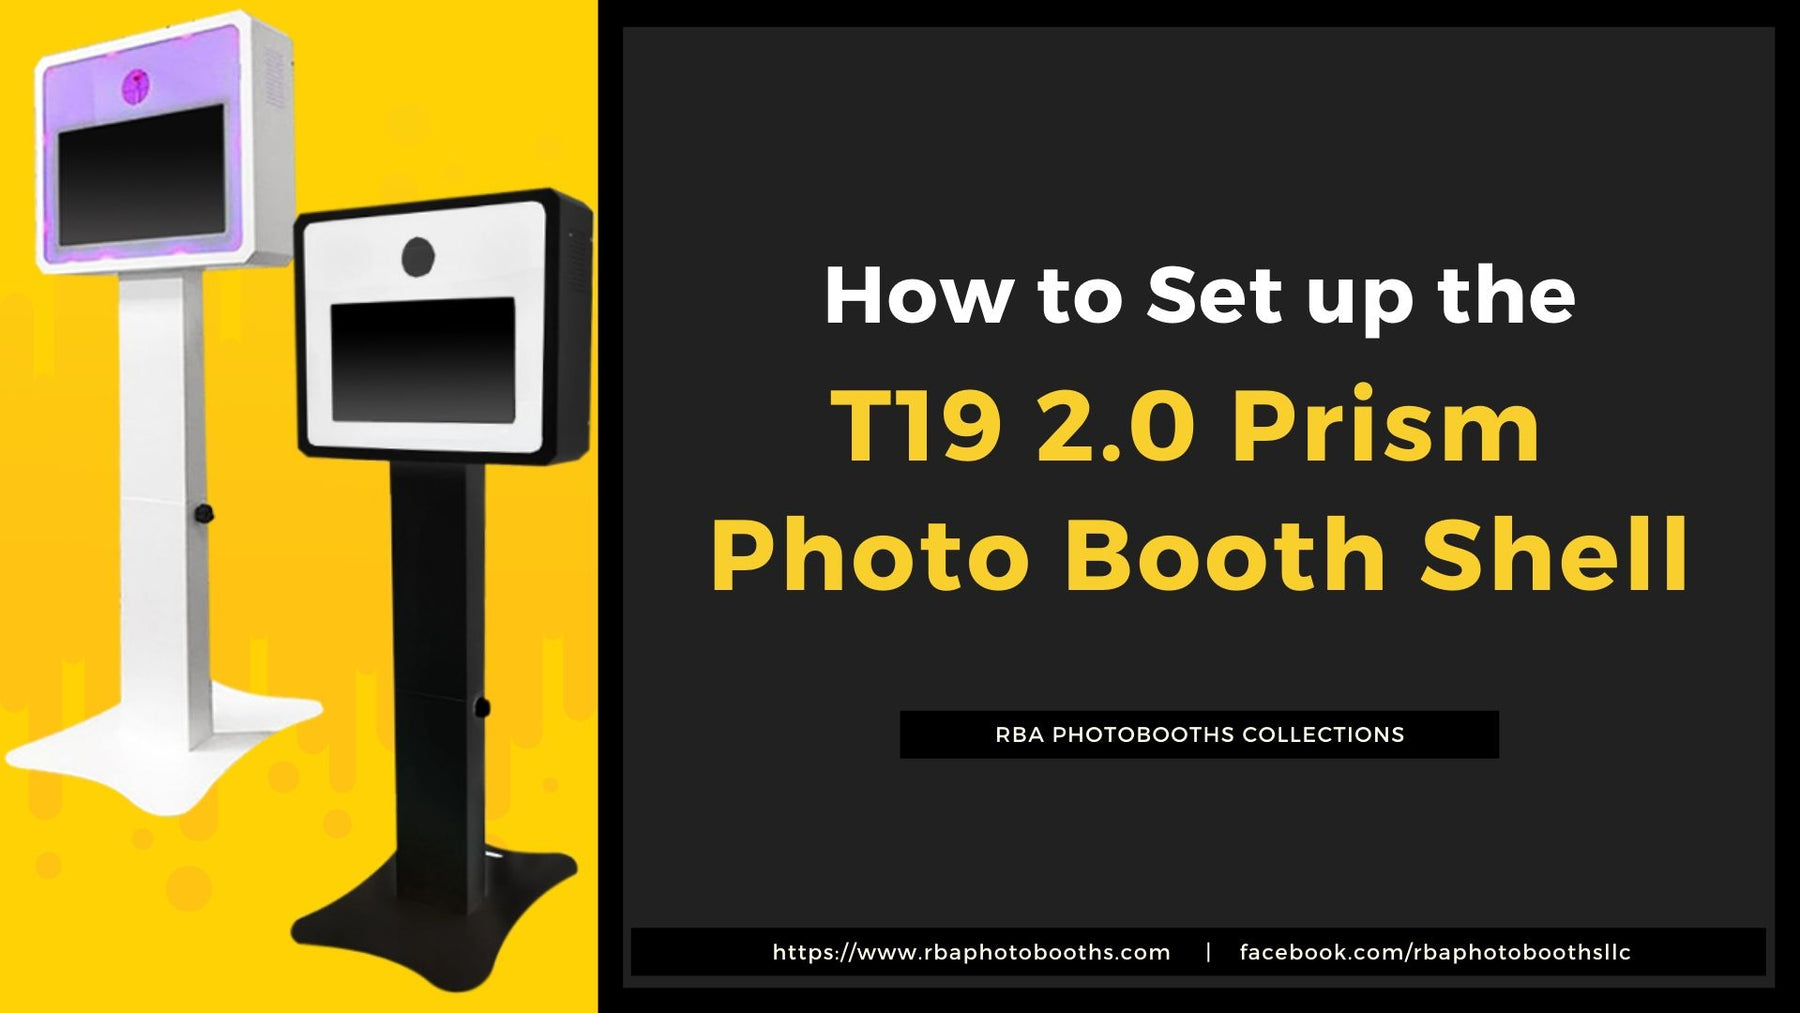 How to Assemble or Setup the T19 2.0 Prism Photo Booth Shell